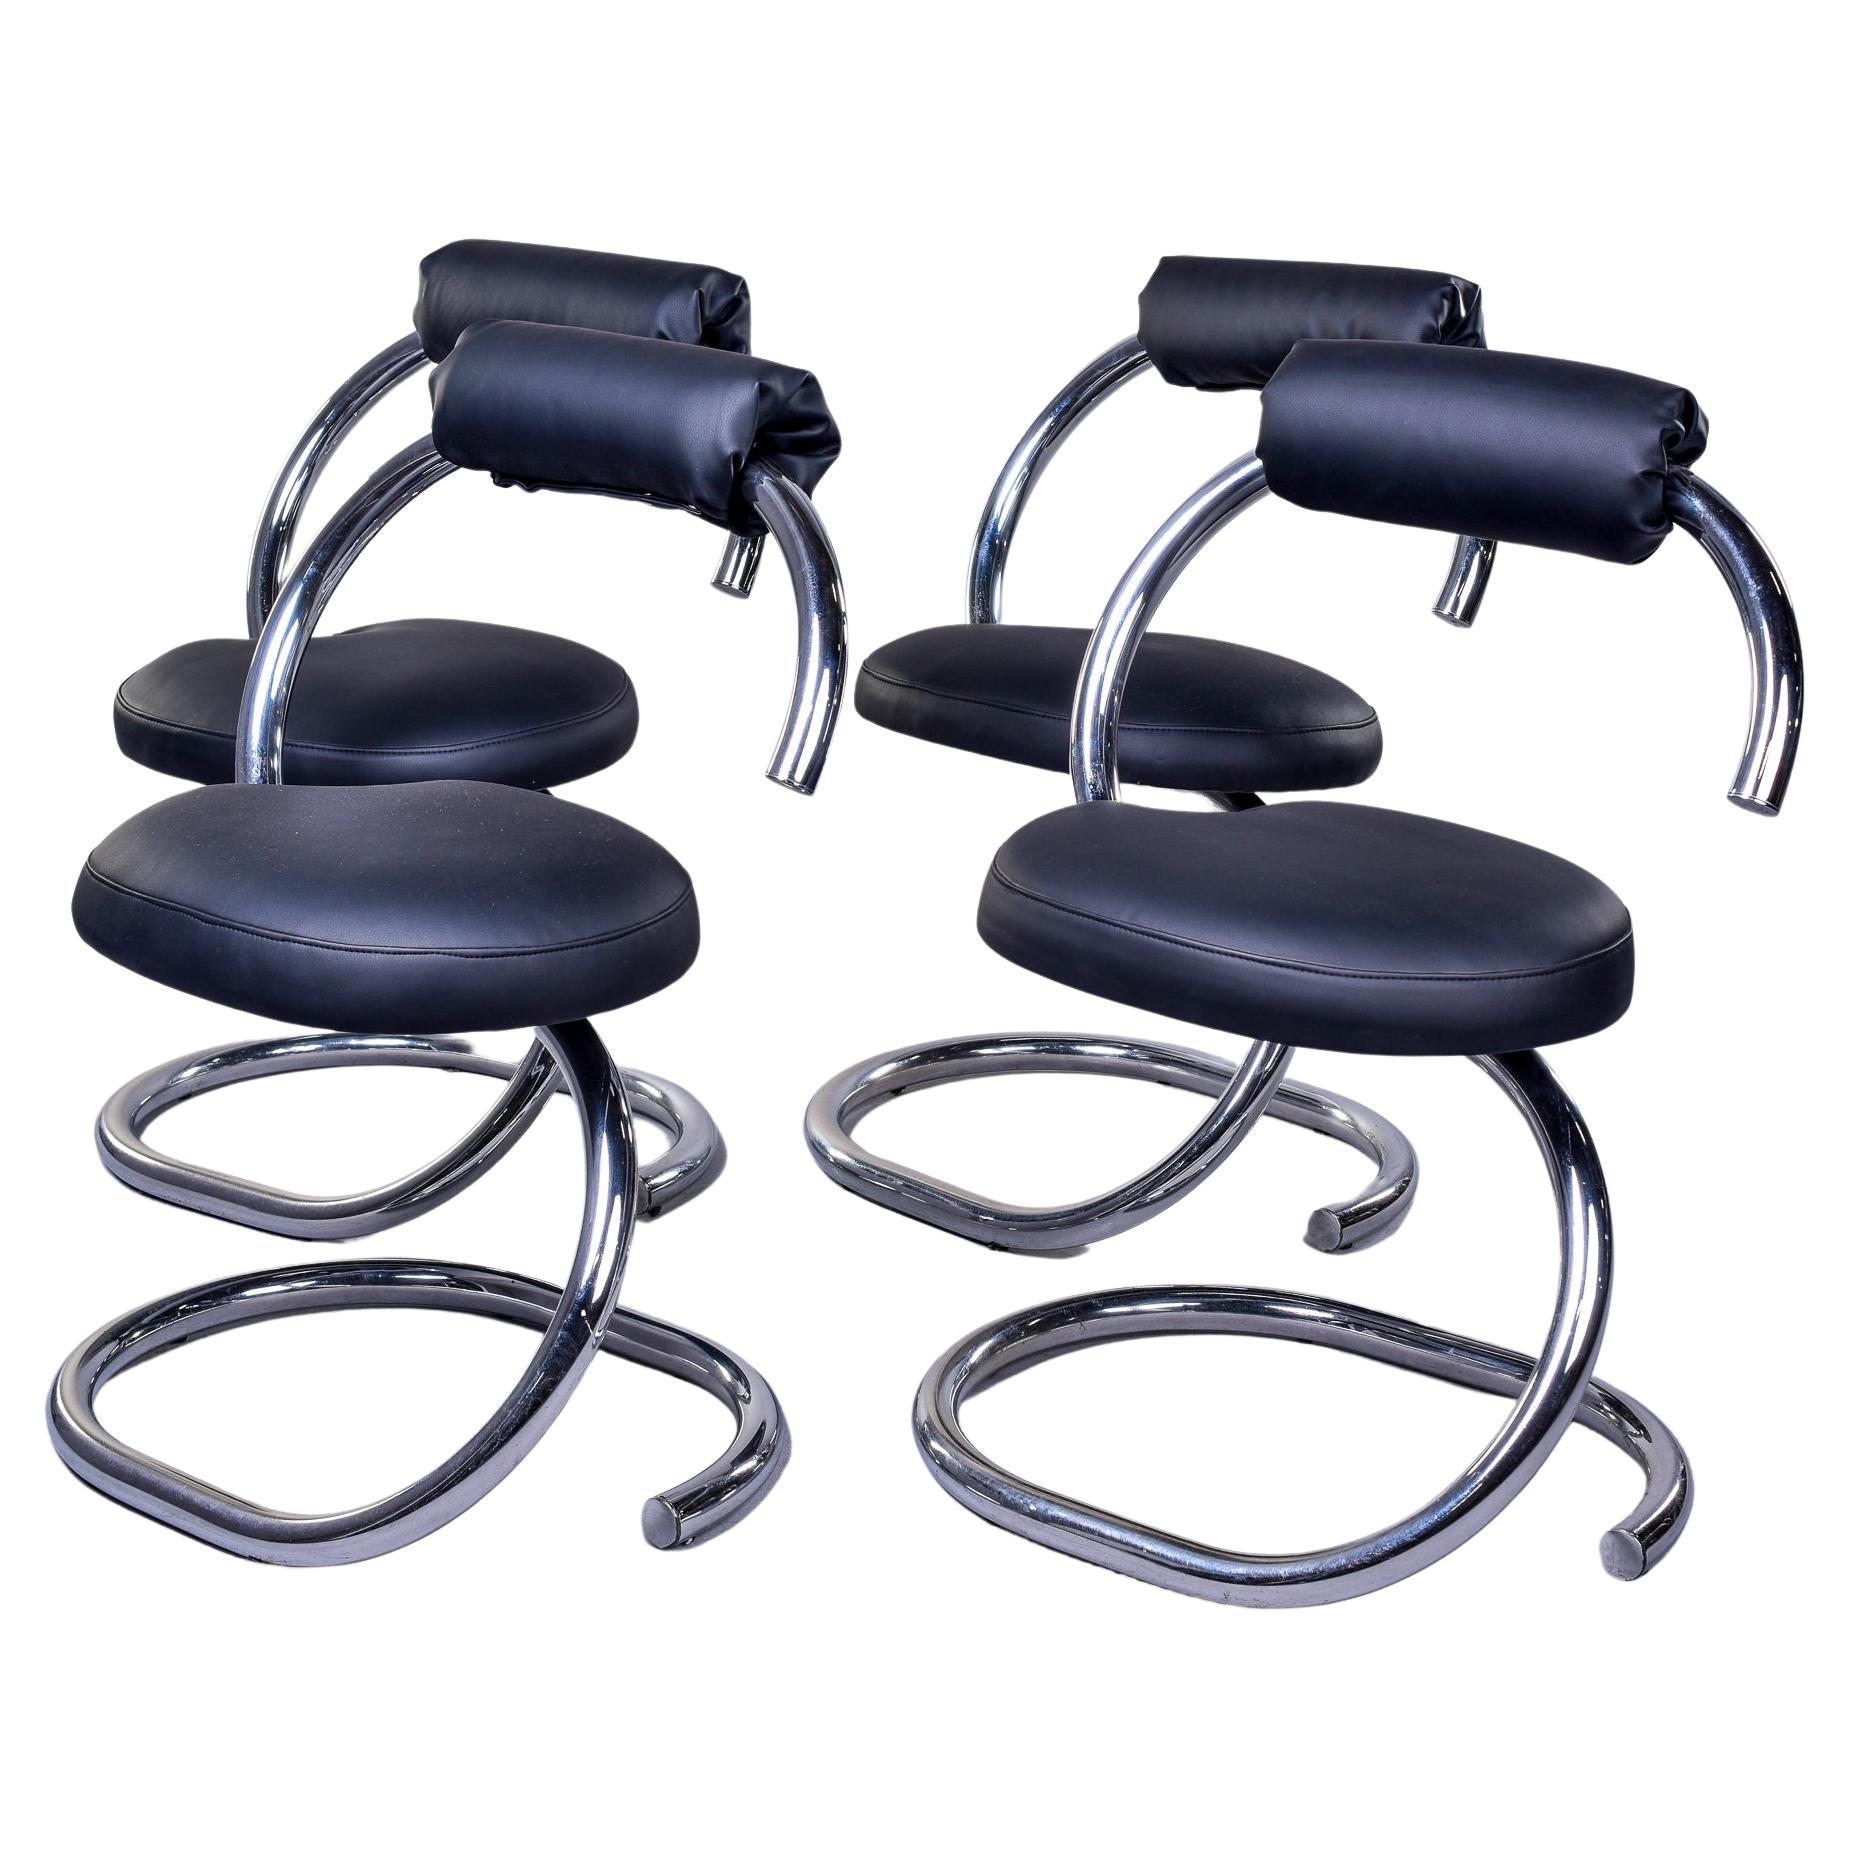 Set of 4 Mid-Century Modern Chrome Chairs with Black Upholstery